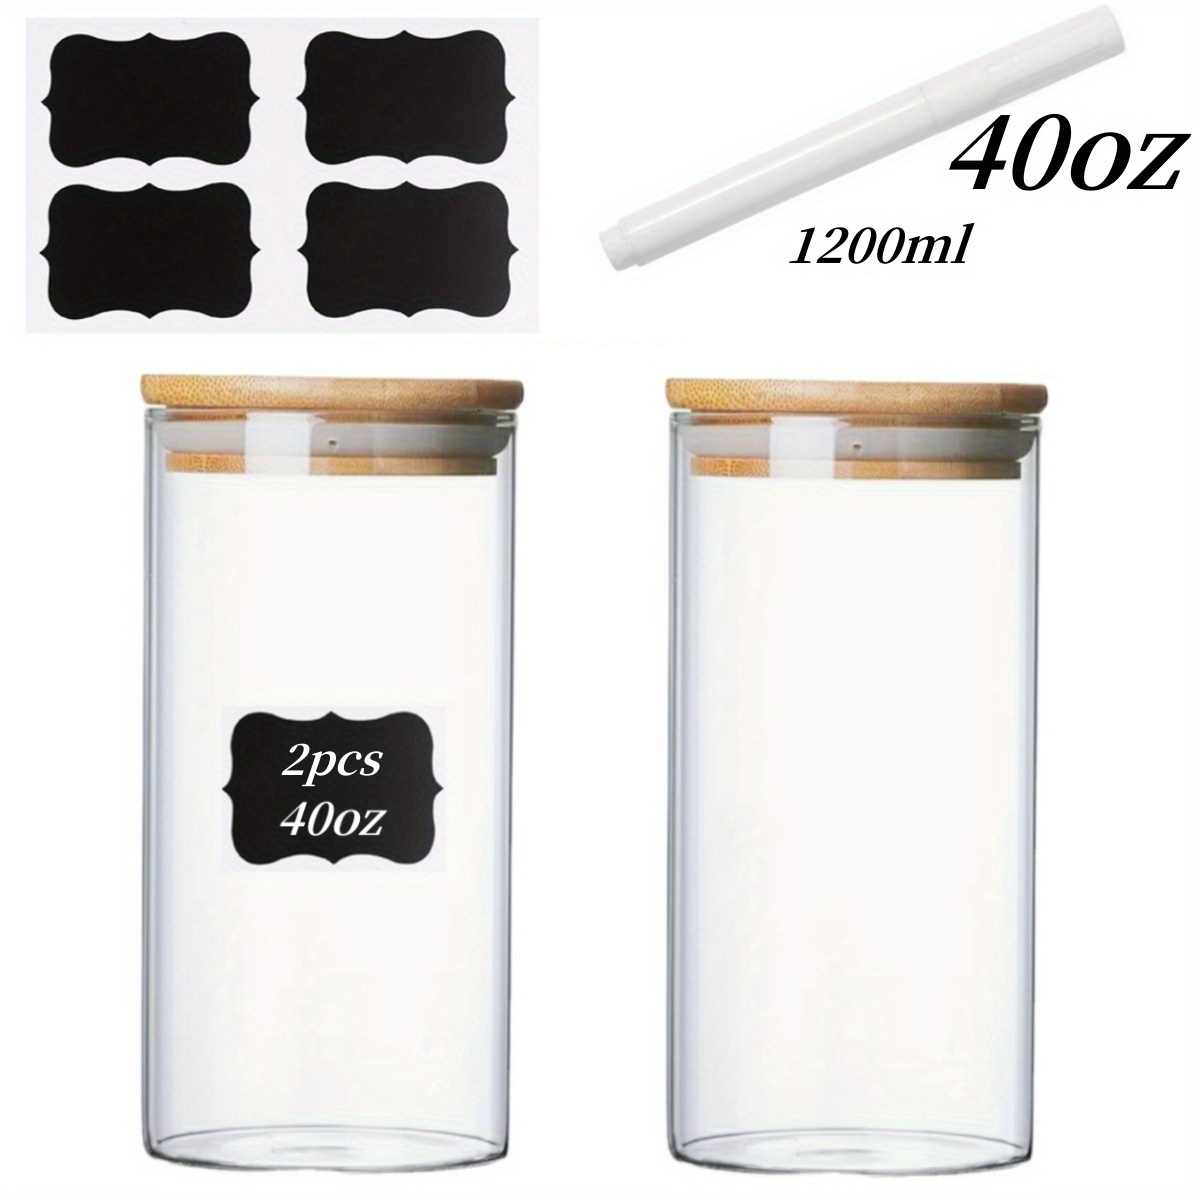 Wholesale 4 oz glass jar with bamboo lid for Trendy and